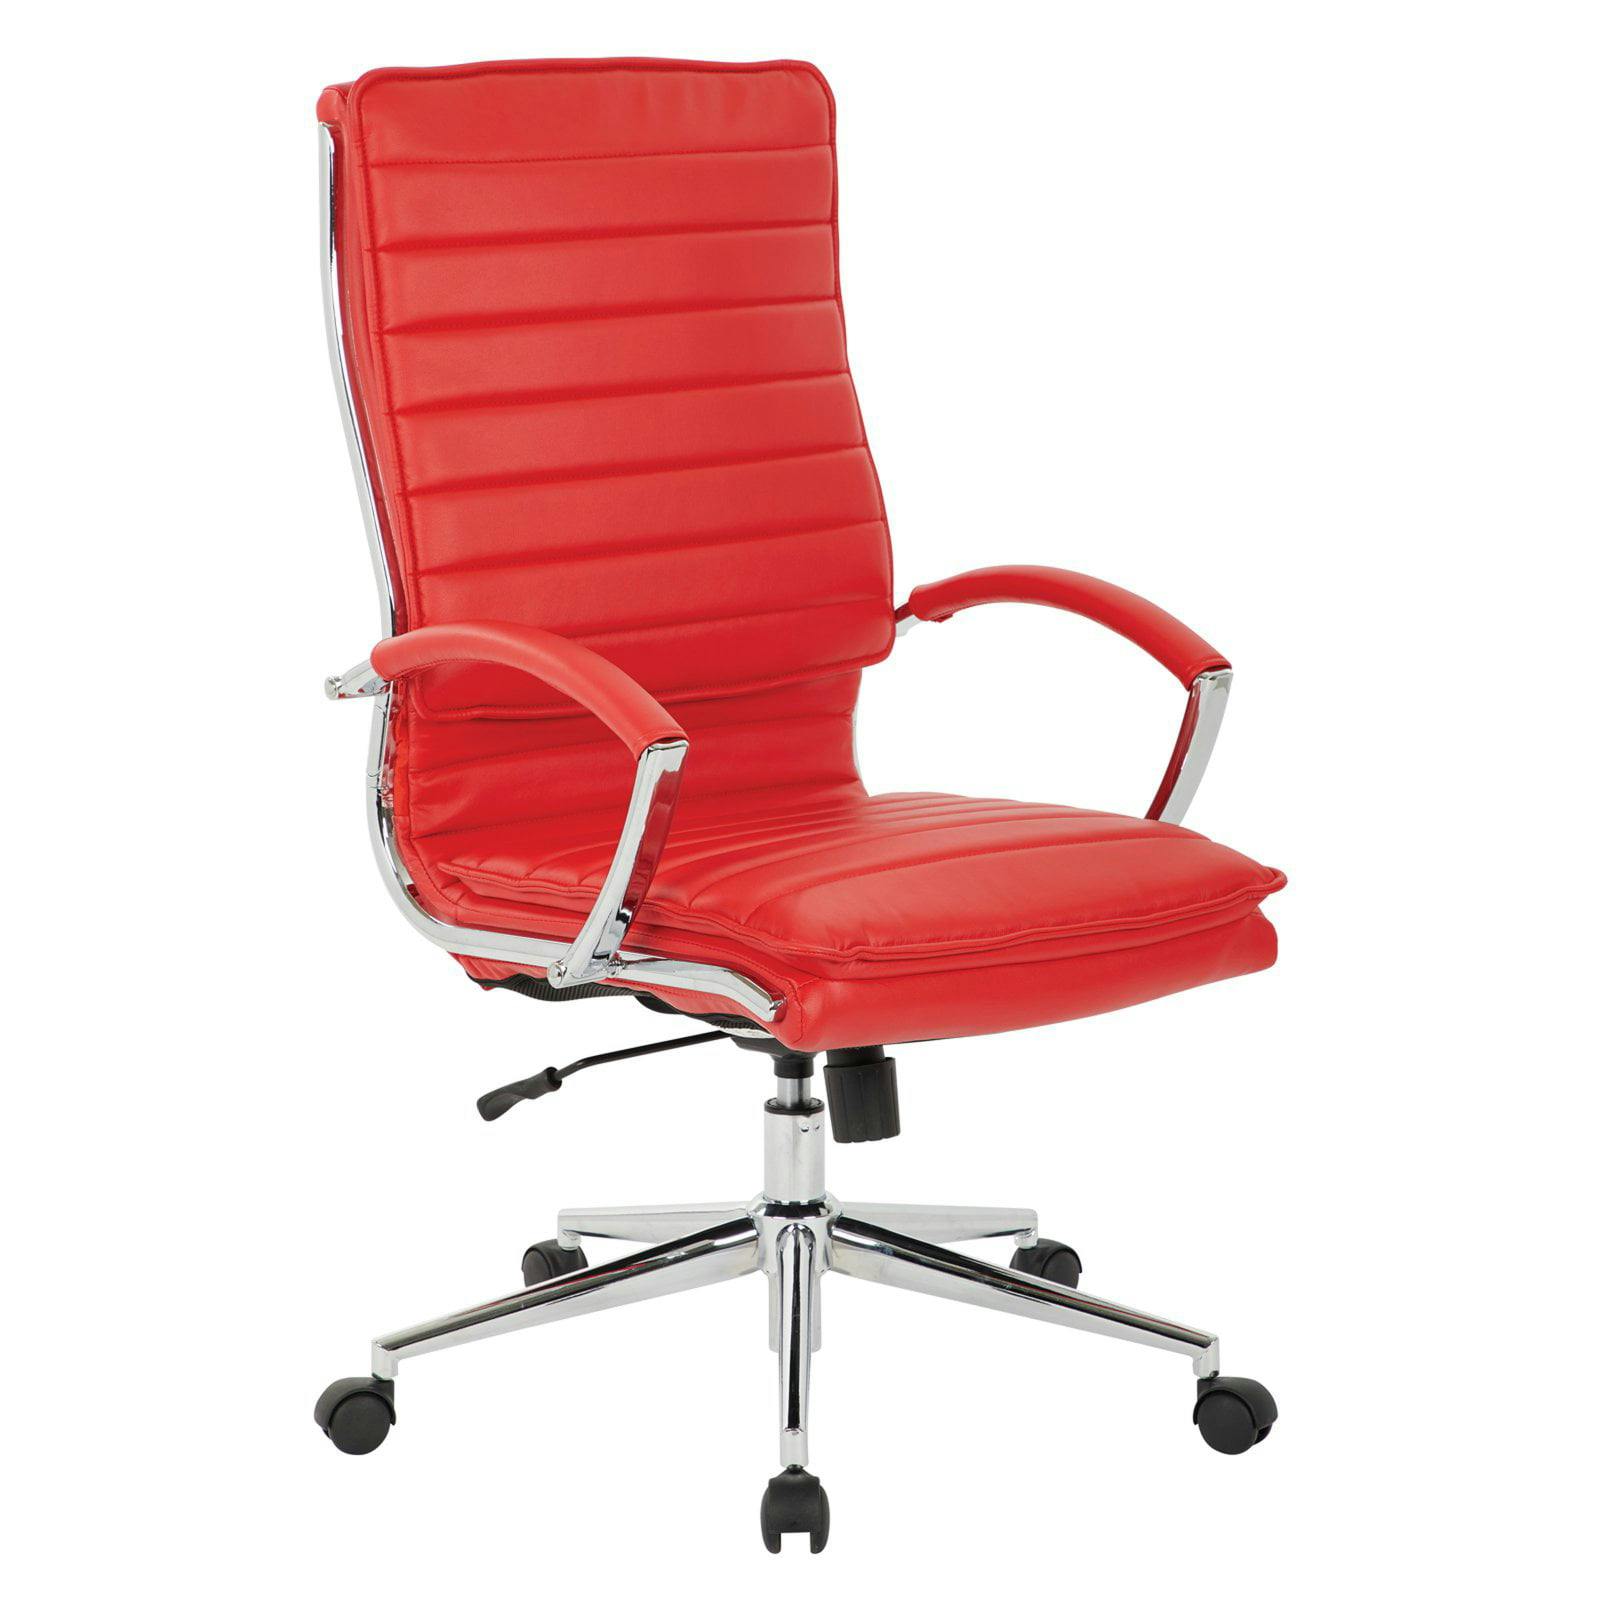 Executive High Back Red Leather Swivel Chair with Metal Base